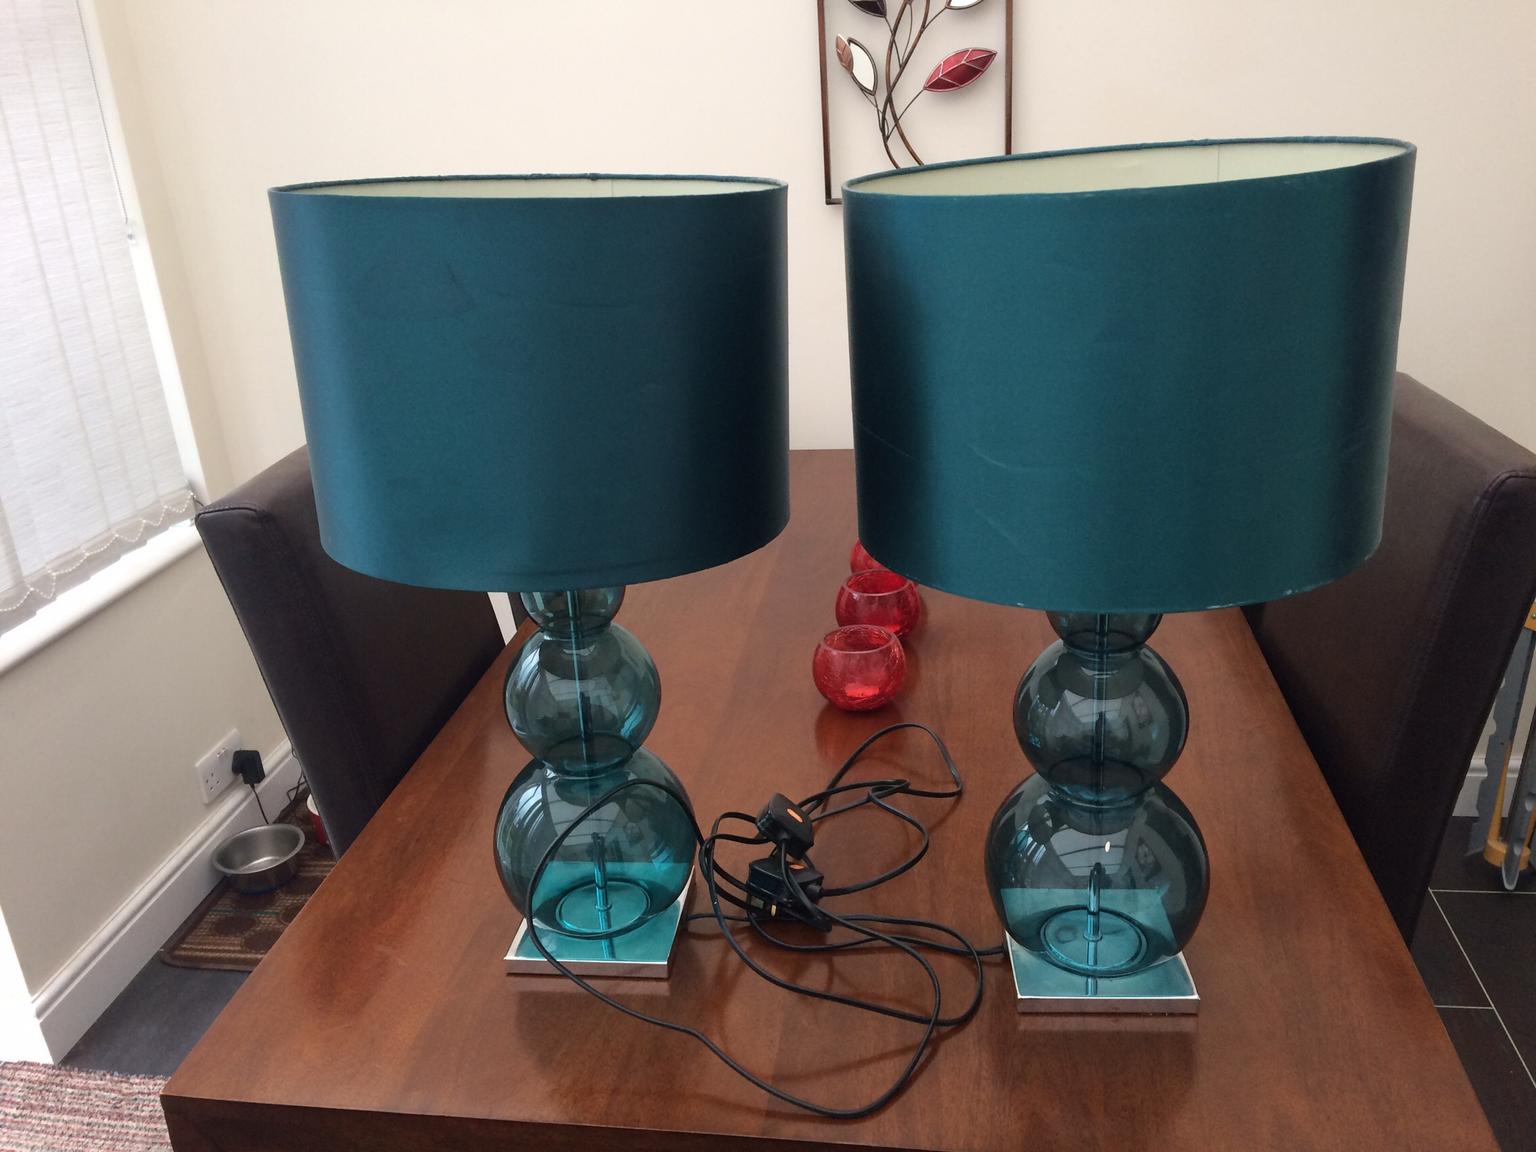 Next Teal Table Lamp Shade In Da2, Teal Bedside Table Lamps